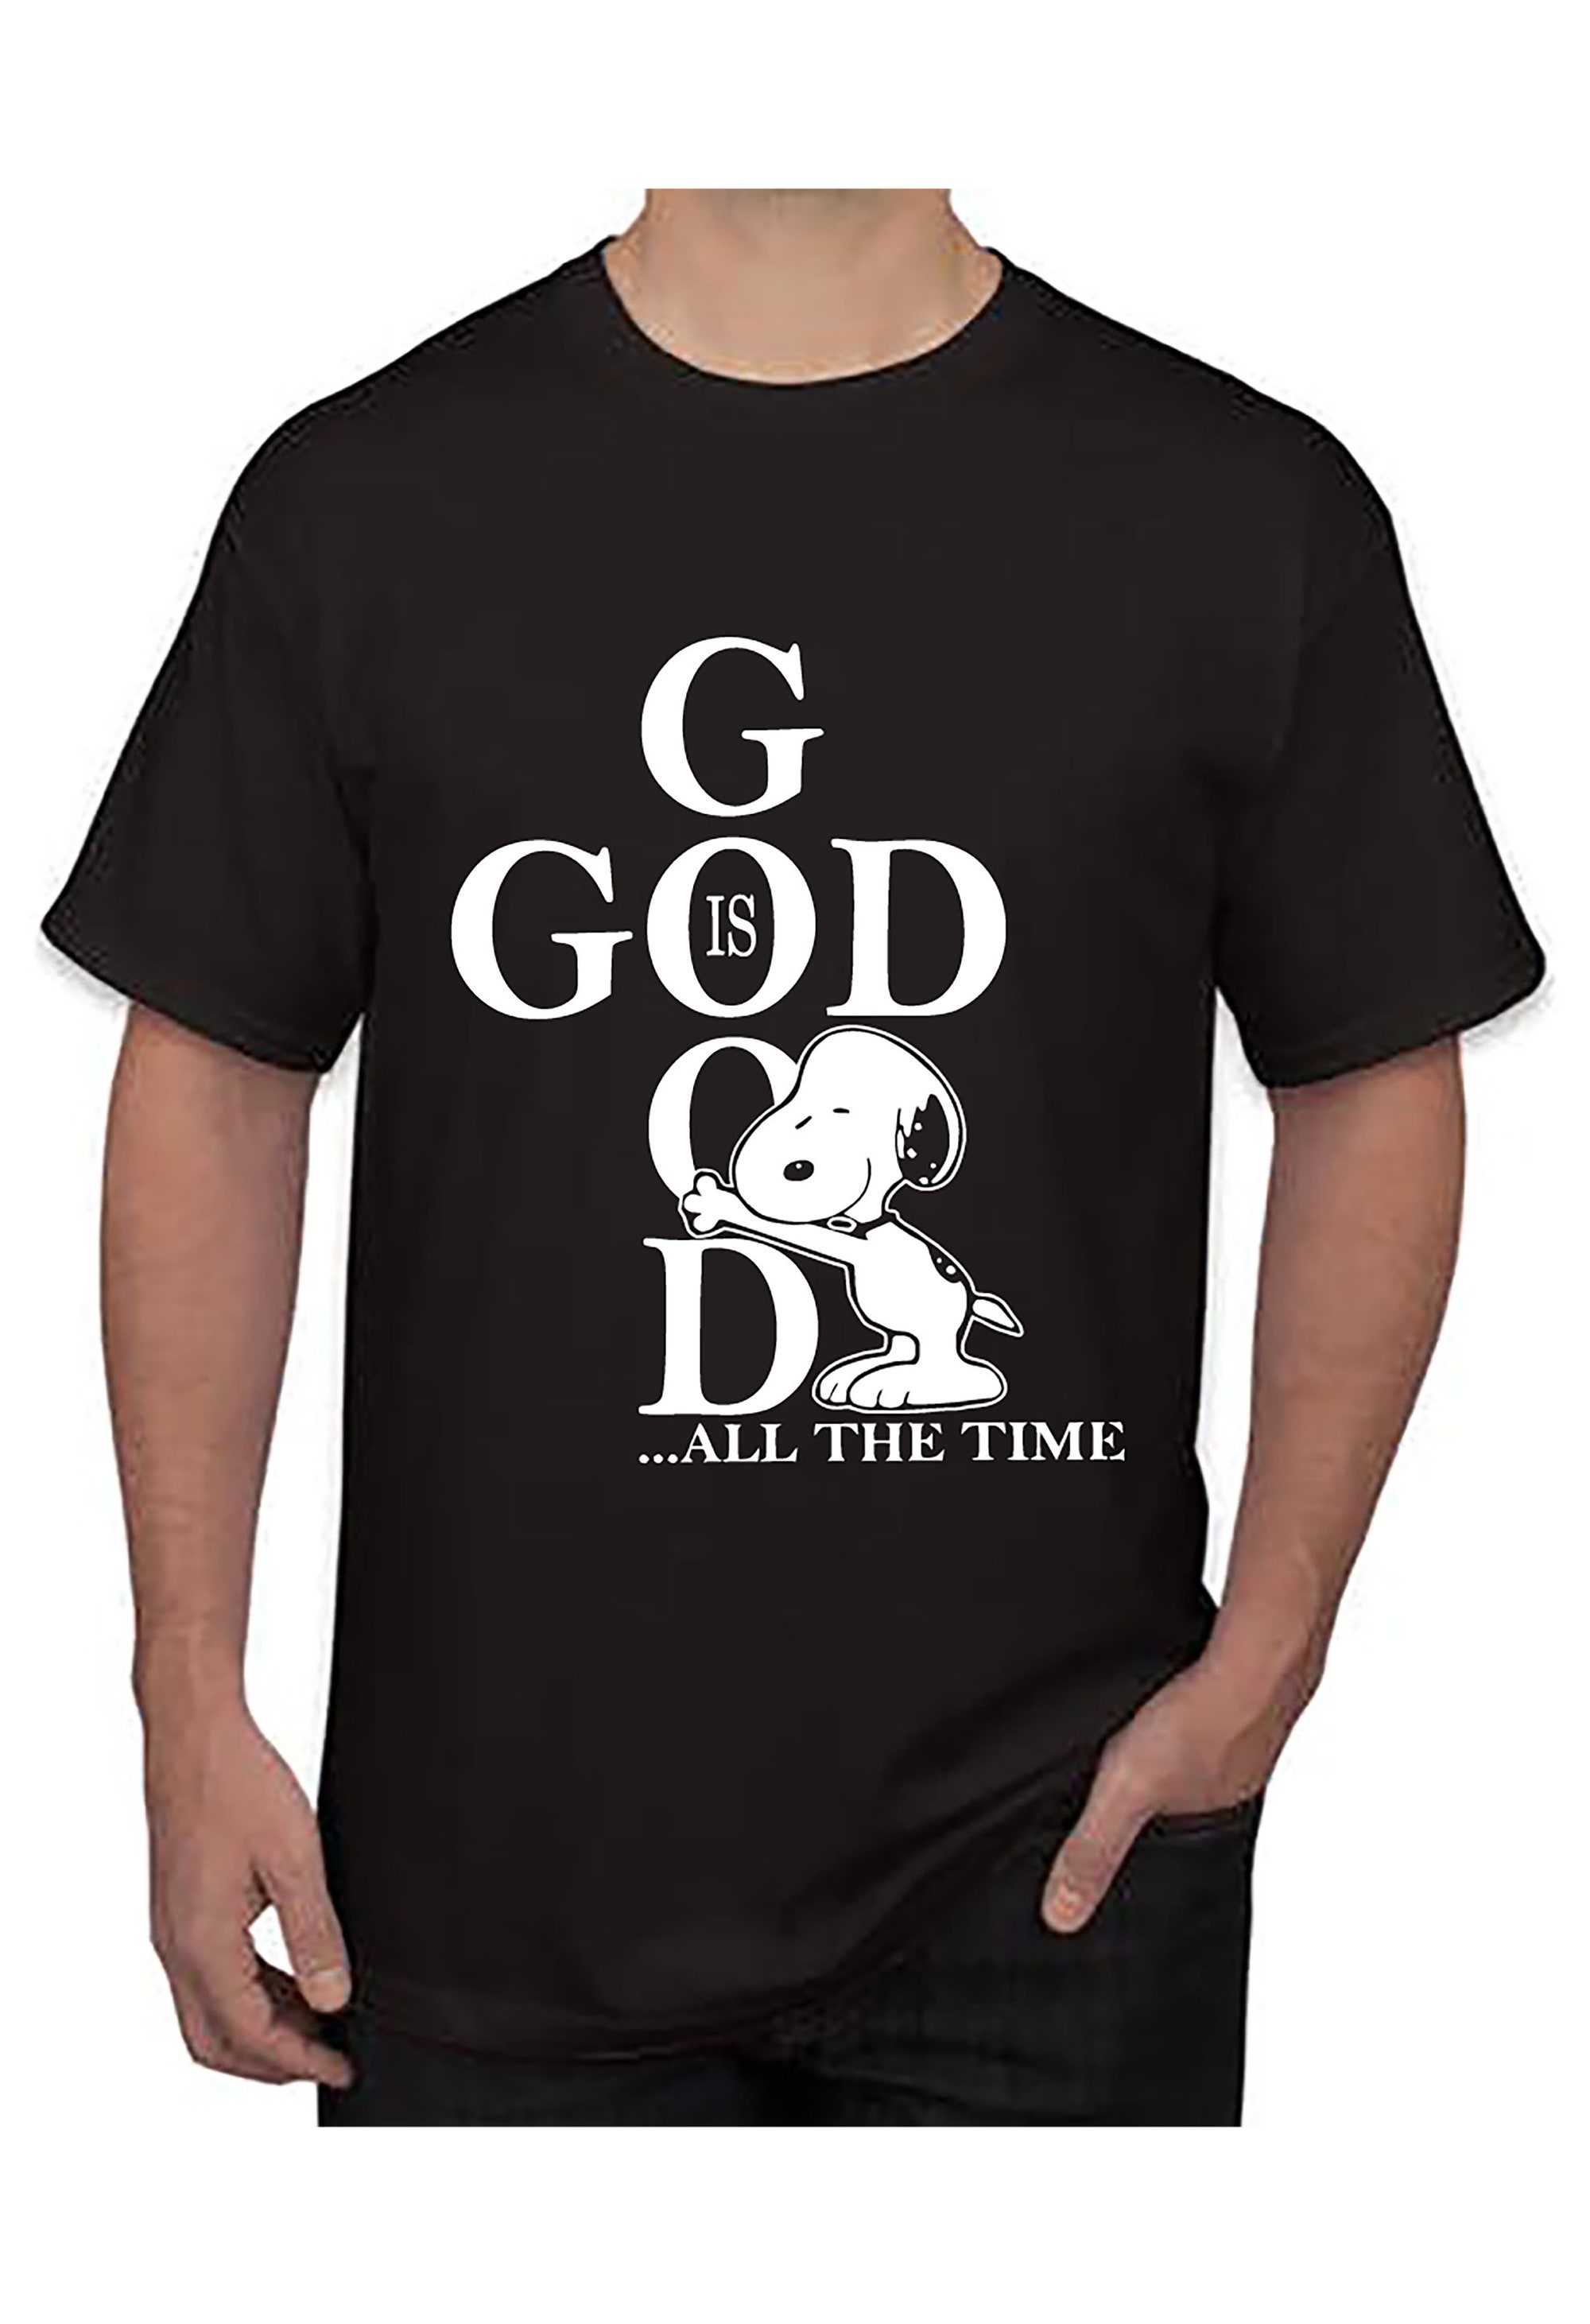 Discover God is Good Snoopy Print T-shirt